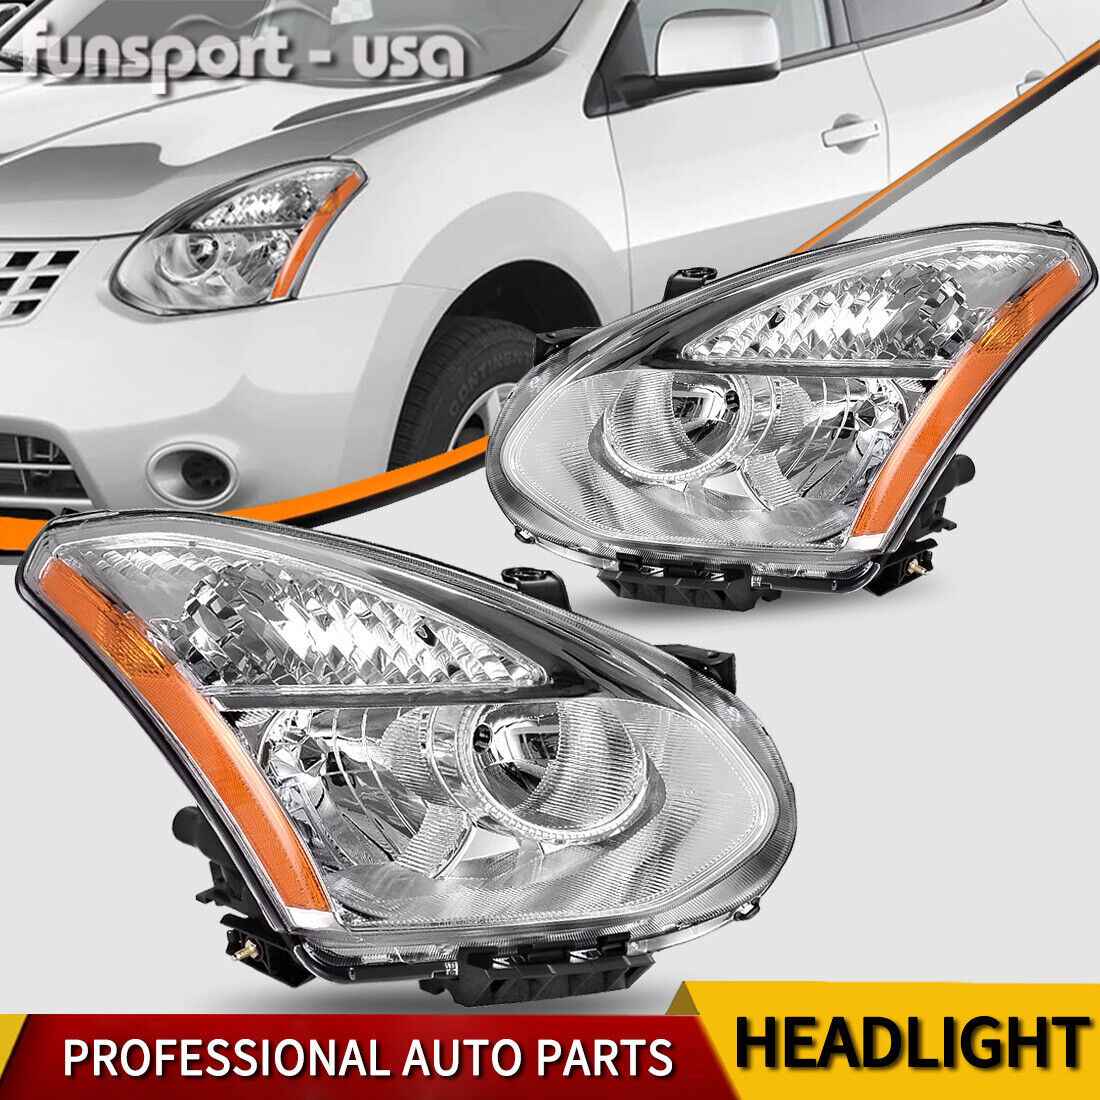 Halogen Type Factory Headlights For 2008-2013 Nissan Rogue Headlamps Left+Right